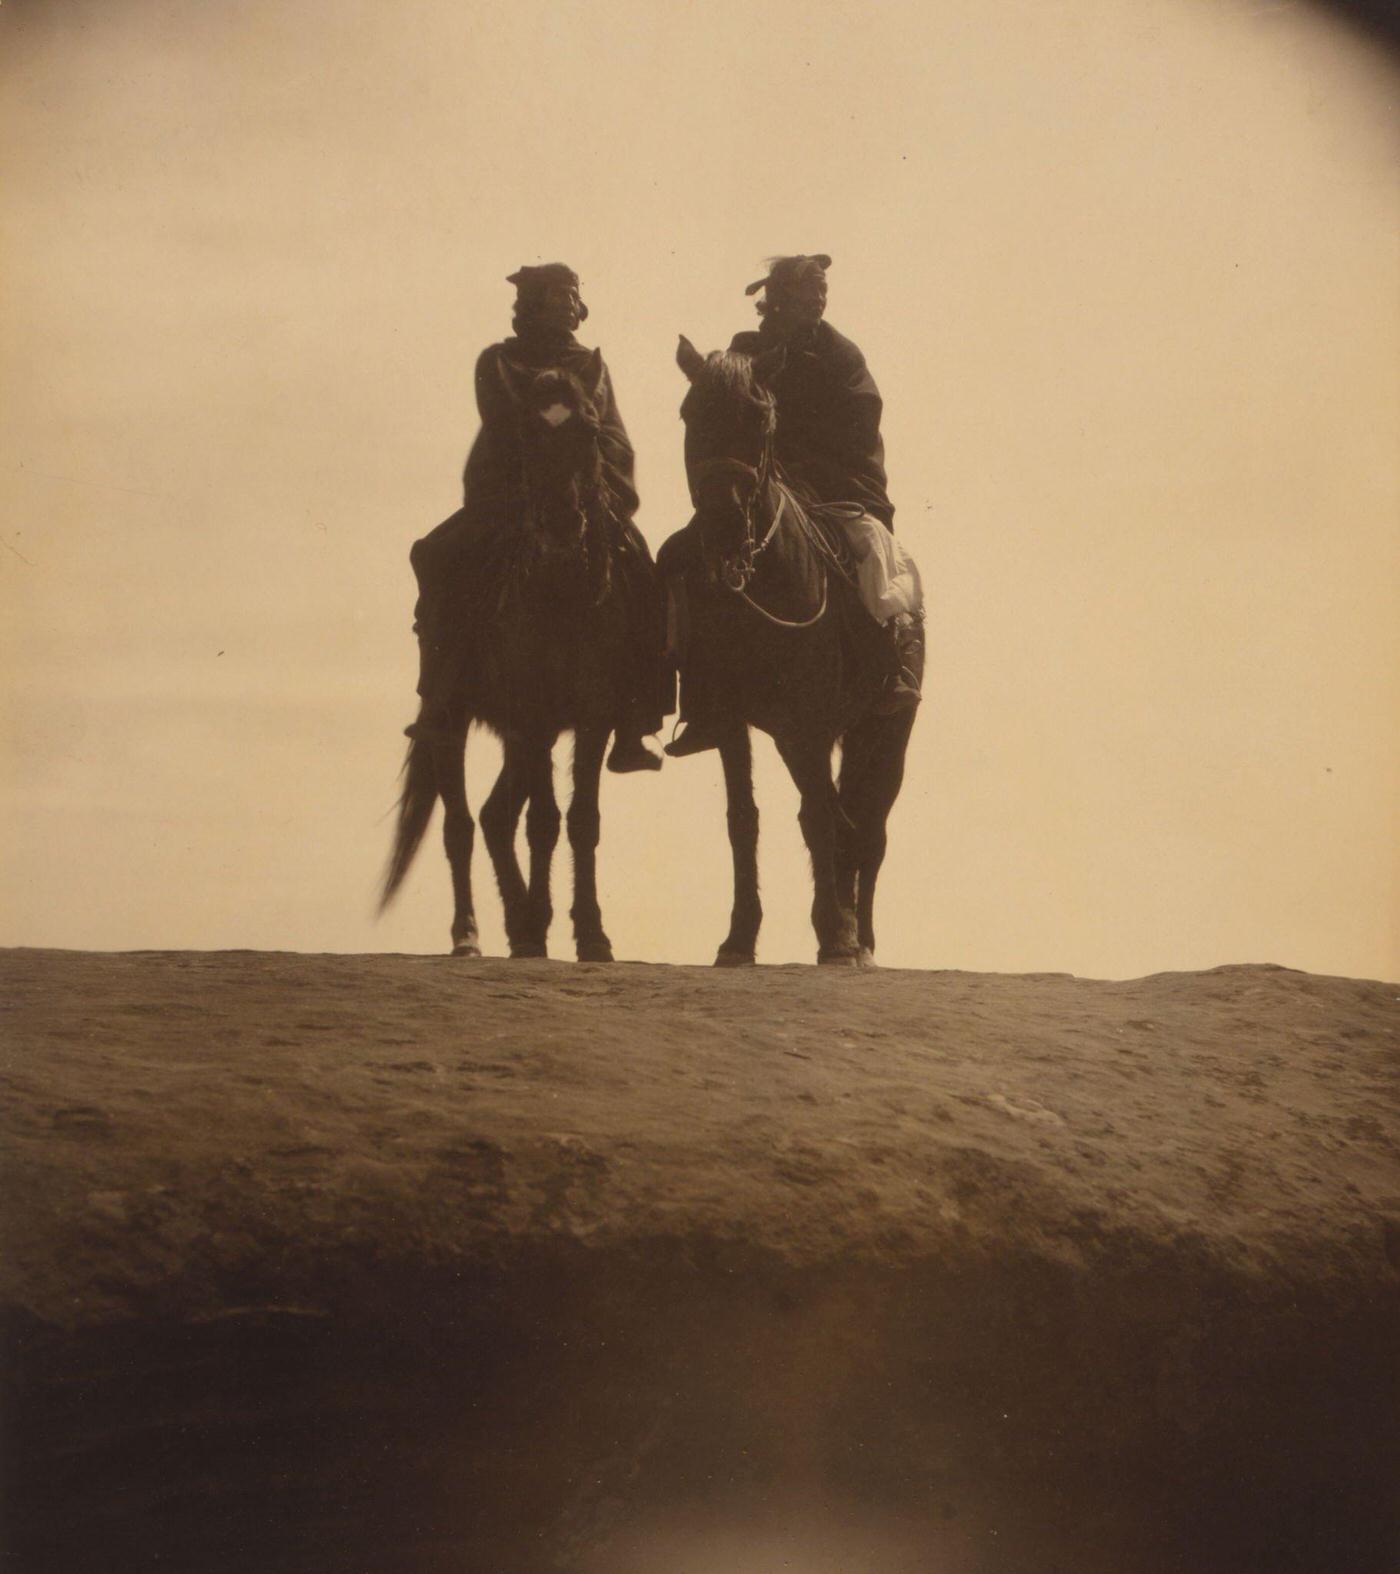 Two native American men mounted on horses, gazing off into the distance, 1904